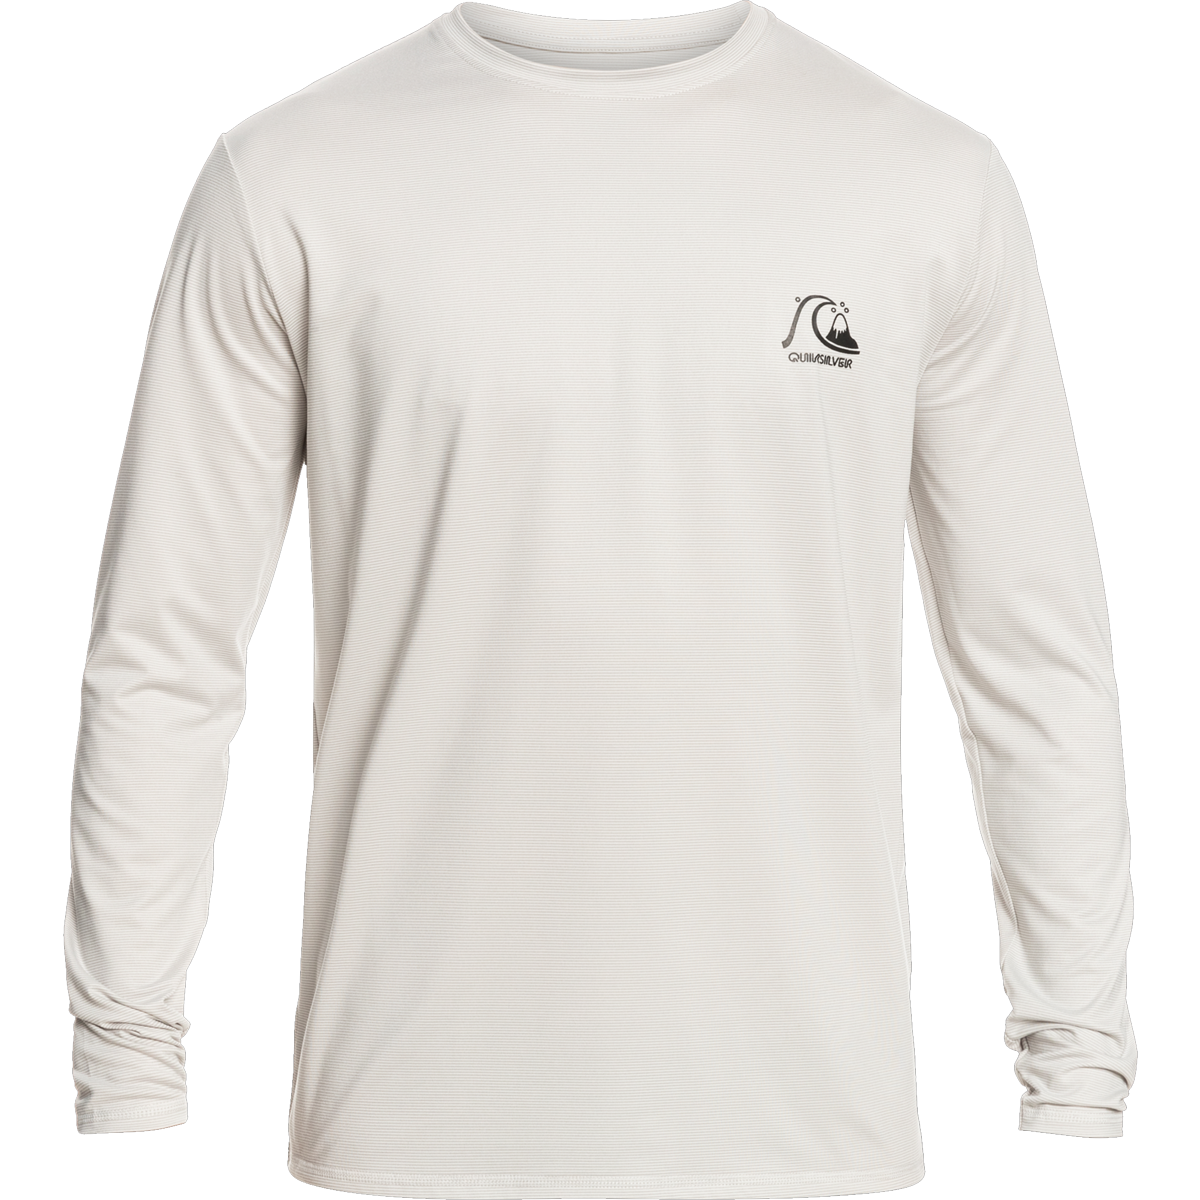 North Baseball Ladies Wicking Long Sleeve with Left Chest Logo